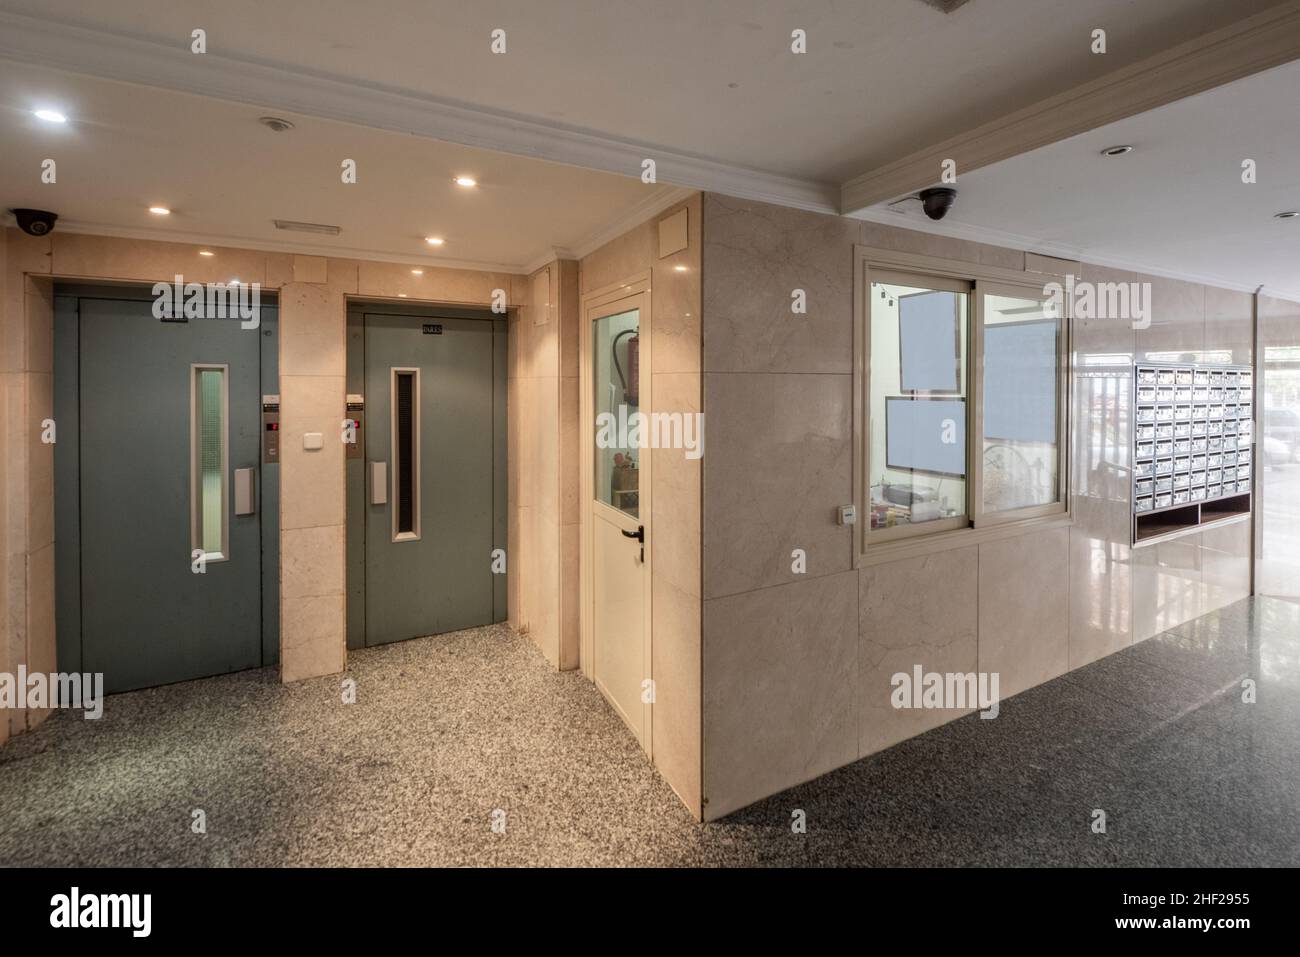 Common areas of a residential building with double elevator with cream marble walls and gray granite floors Stock Photo